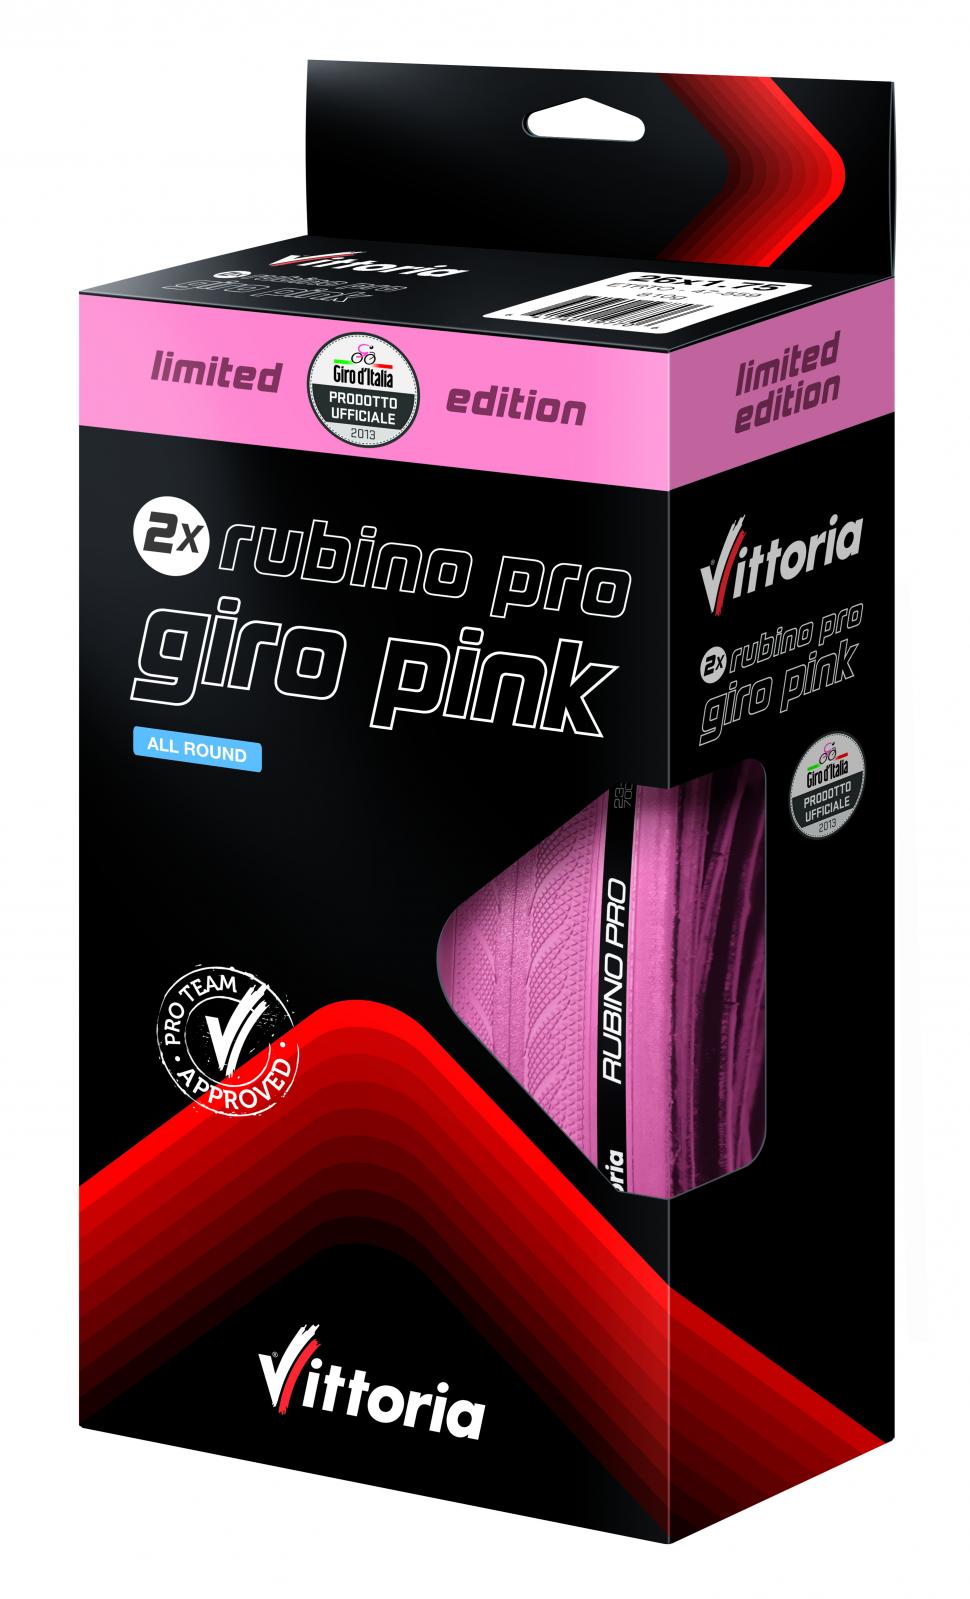 Vittoria celebrate Giro d'Italia with limited edition pink tyres